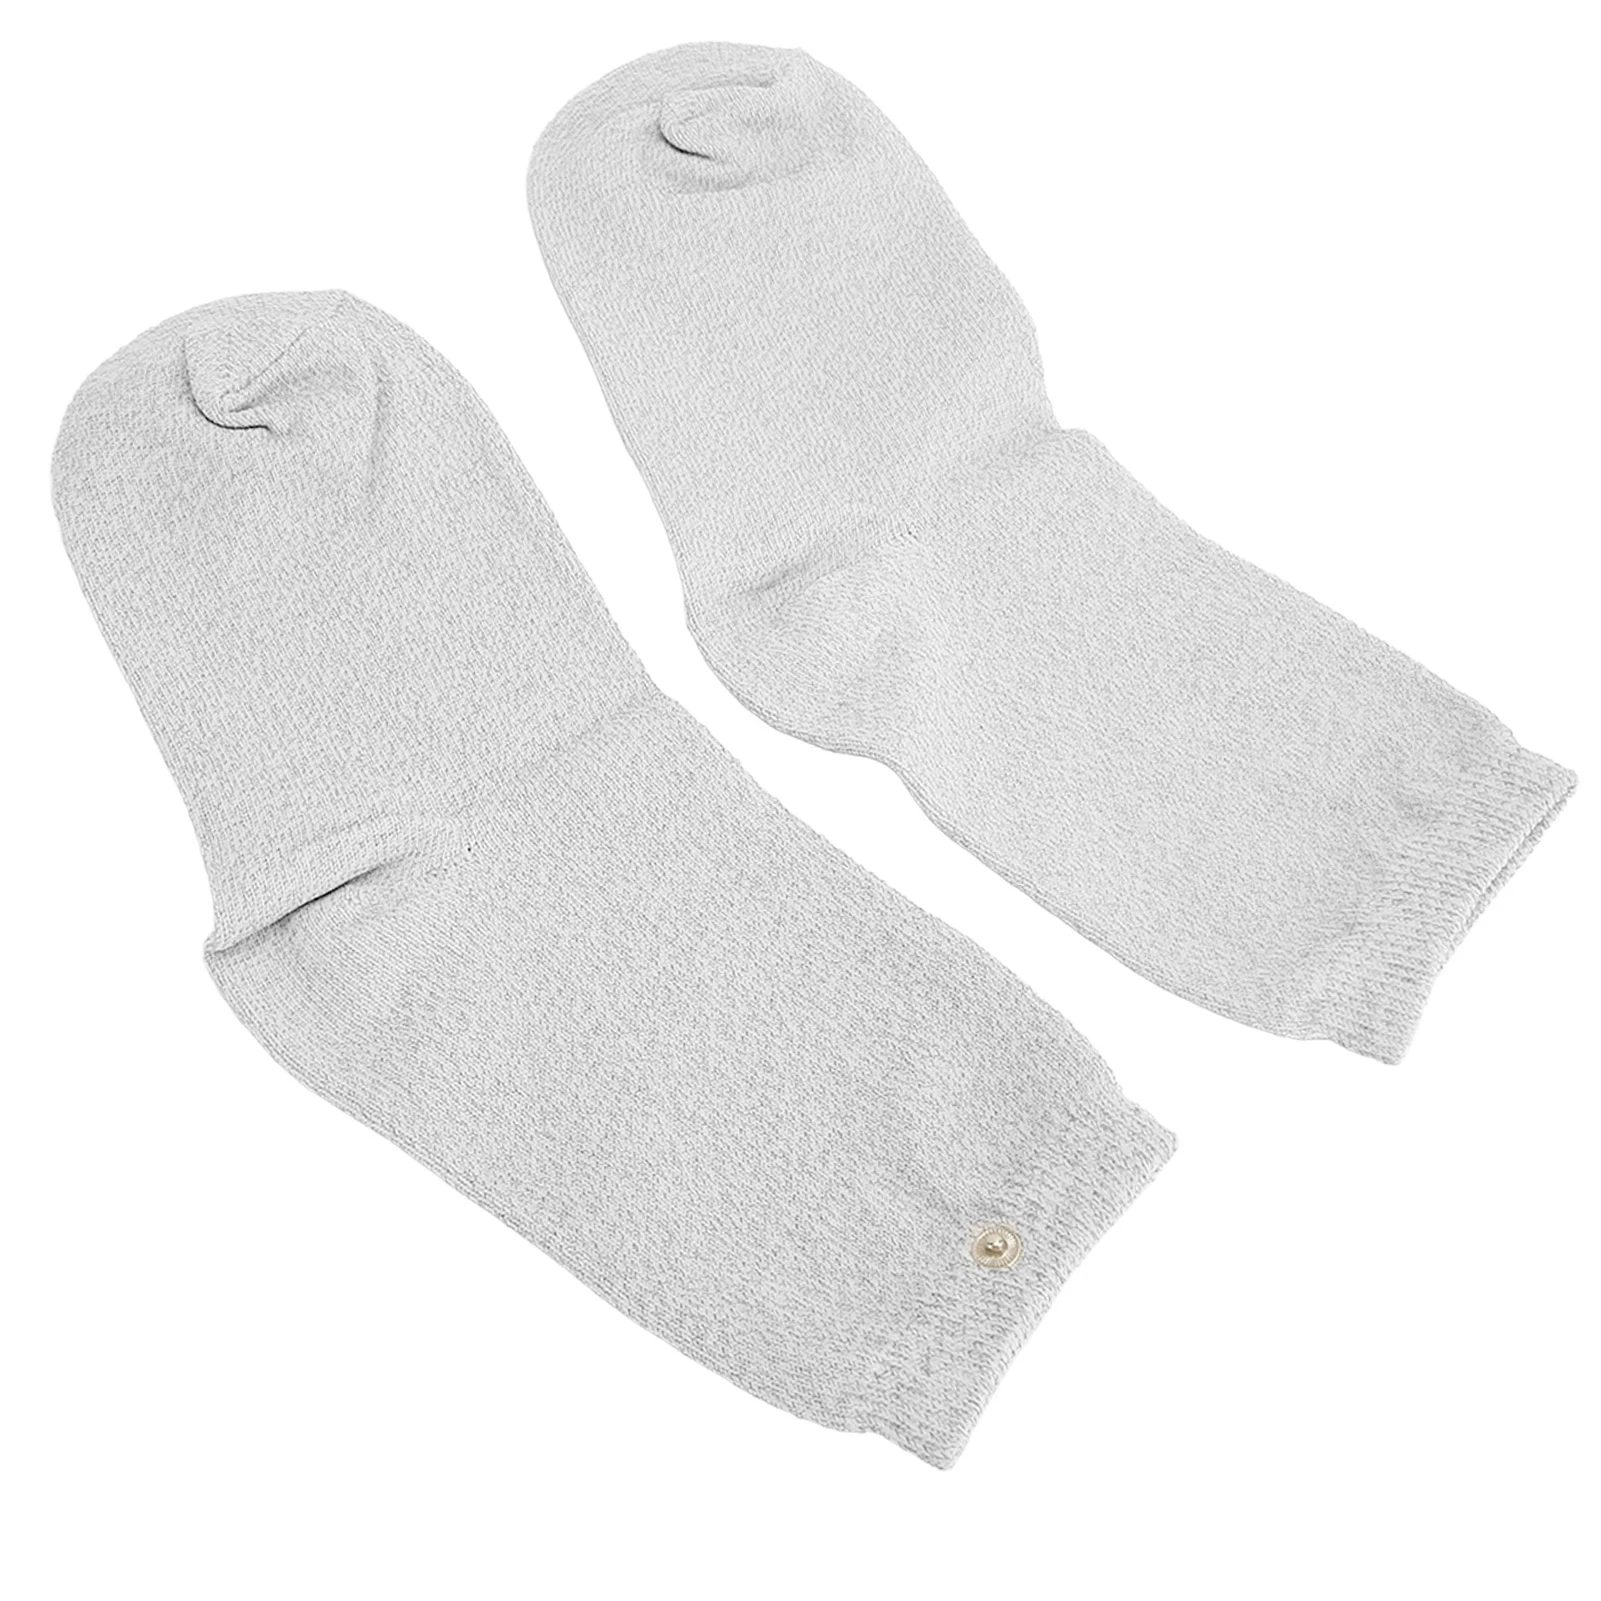 1 Pair of Conductive Socks Elastic Electric Therapy Silver Fiber Conductive Massage Electrode Socks for Arthritis practical wrist brace gloves sweat absorbent men women pure color stretchy arthritis gloves unisex gloves gloves 1 pair